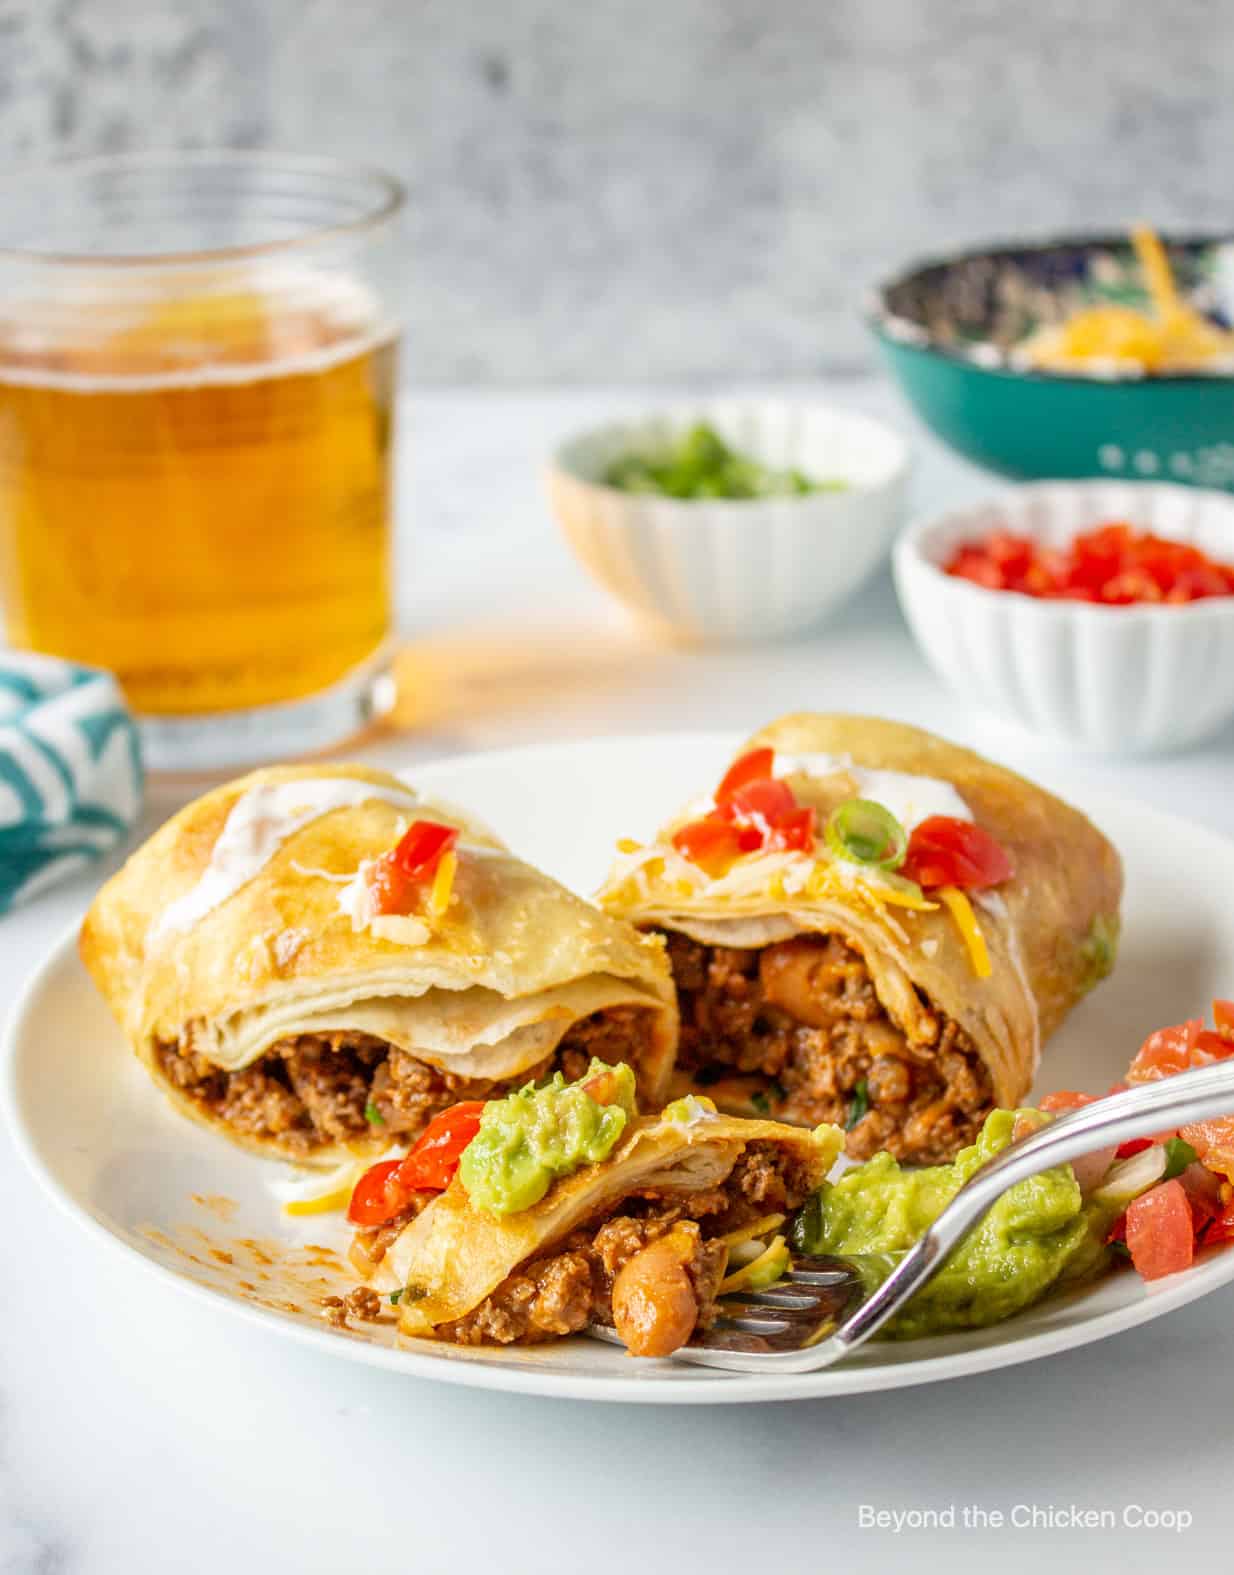 Fried beef burrito with beans. 